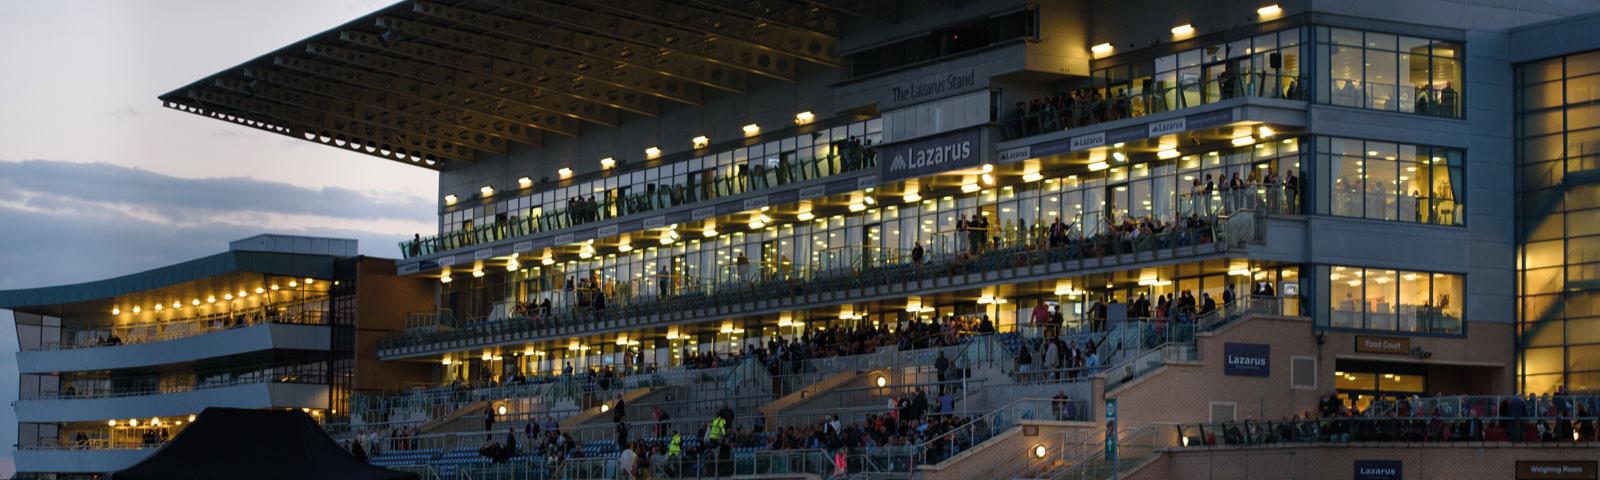 Grandstand at Doncaster Racecourse.